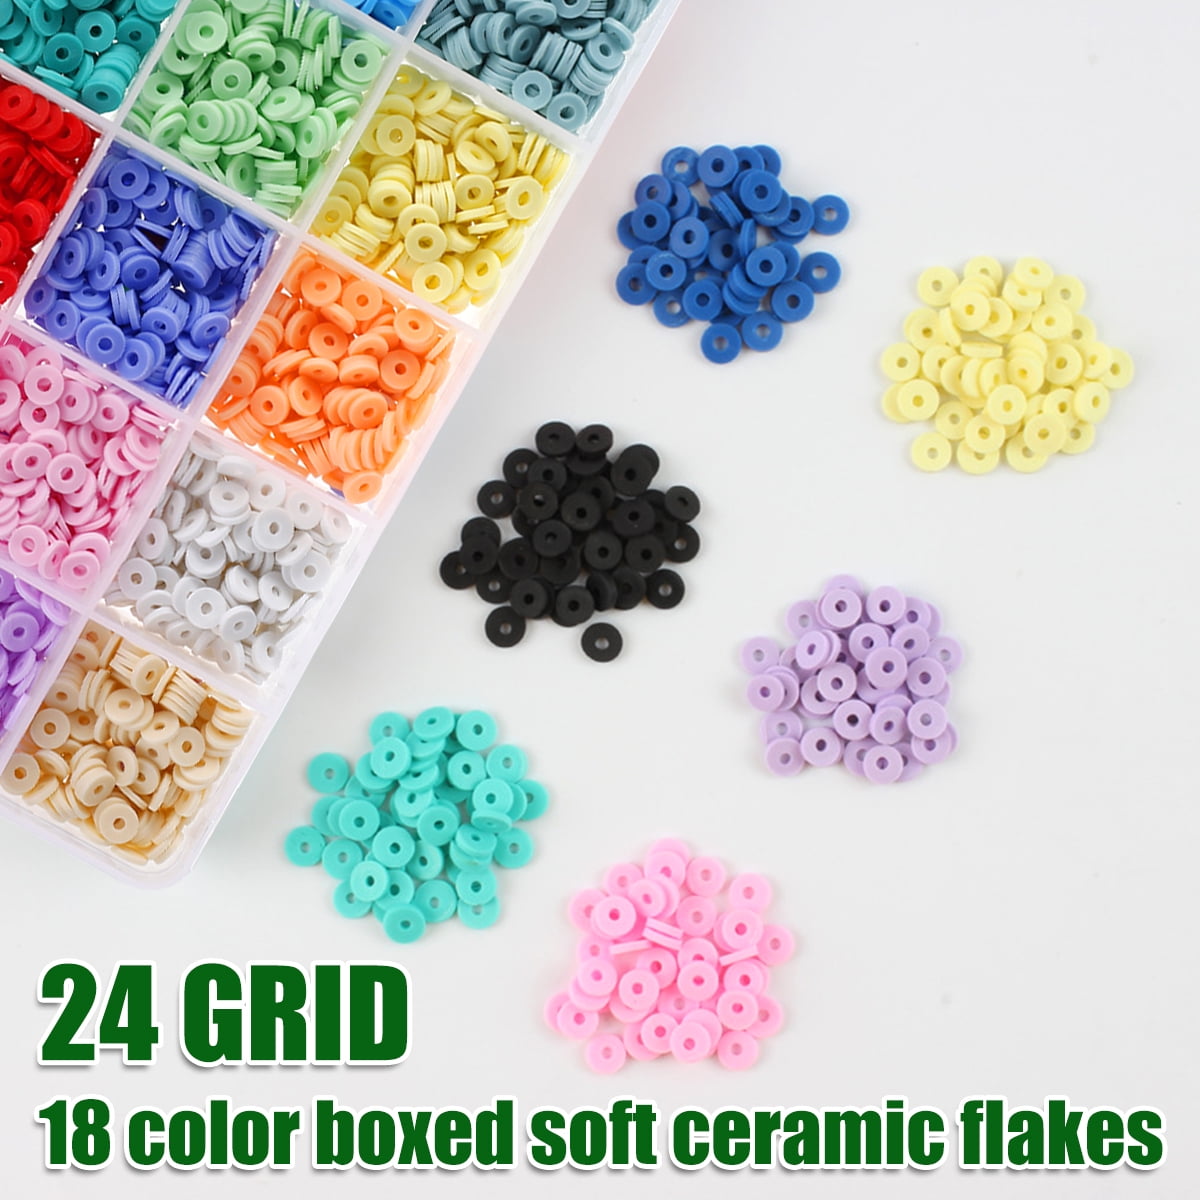 selliner 7200 Pcs Clay Beads,Clay Beads for Jewellery Making,Flat Beads  with Round Beads and Letter Beads for Bracelets Making,Polymer Cay Beads  for